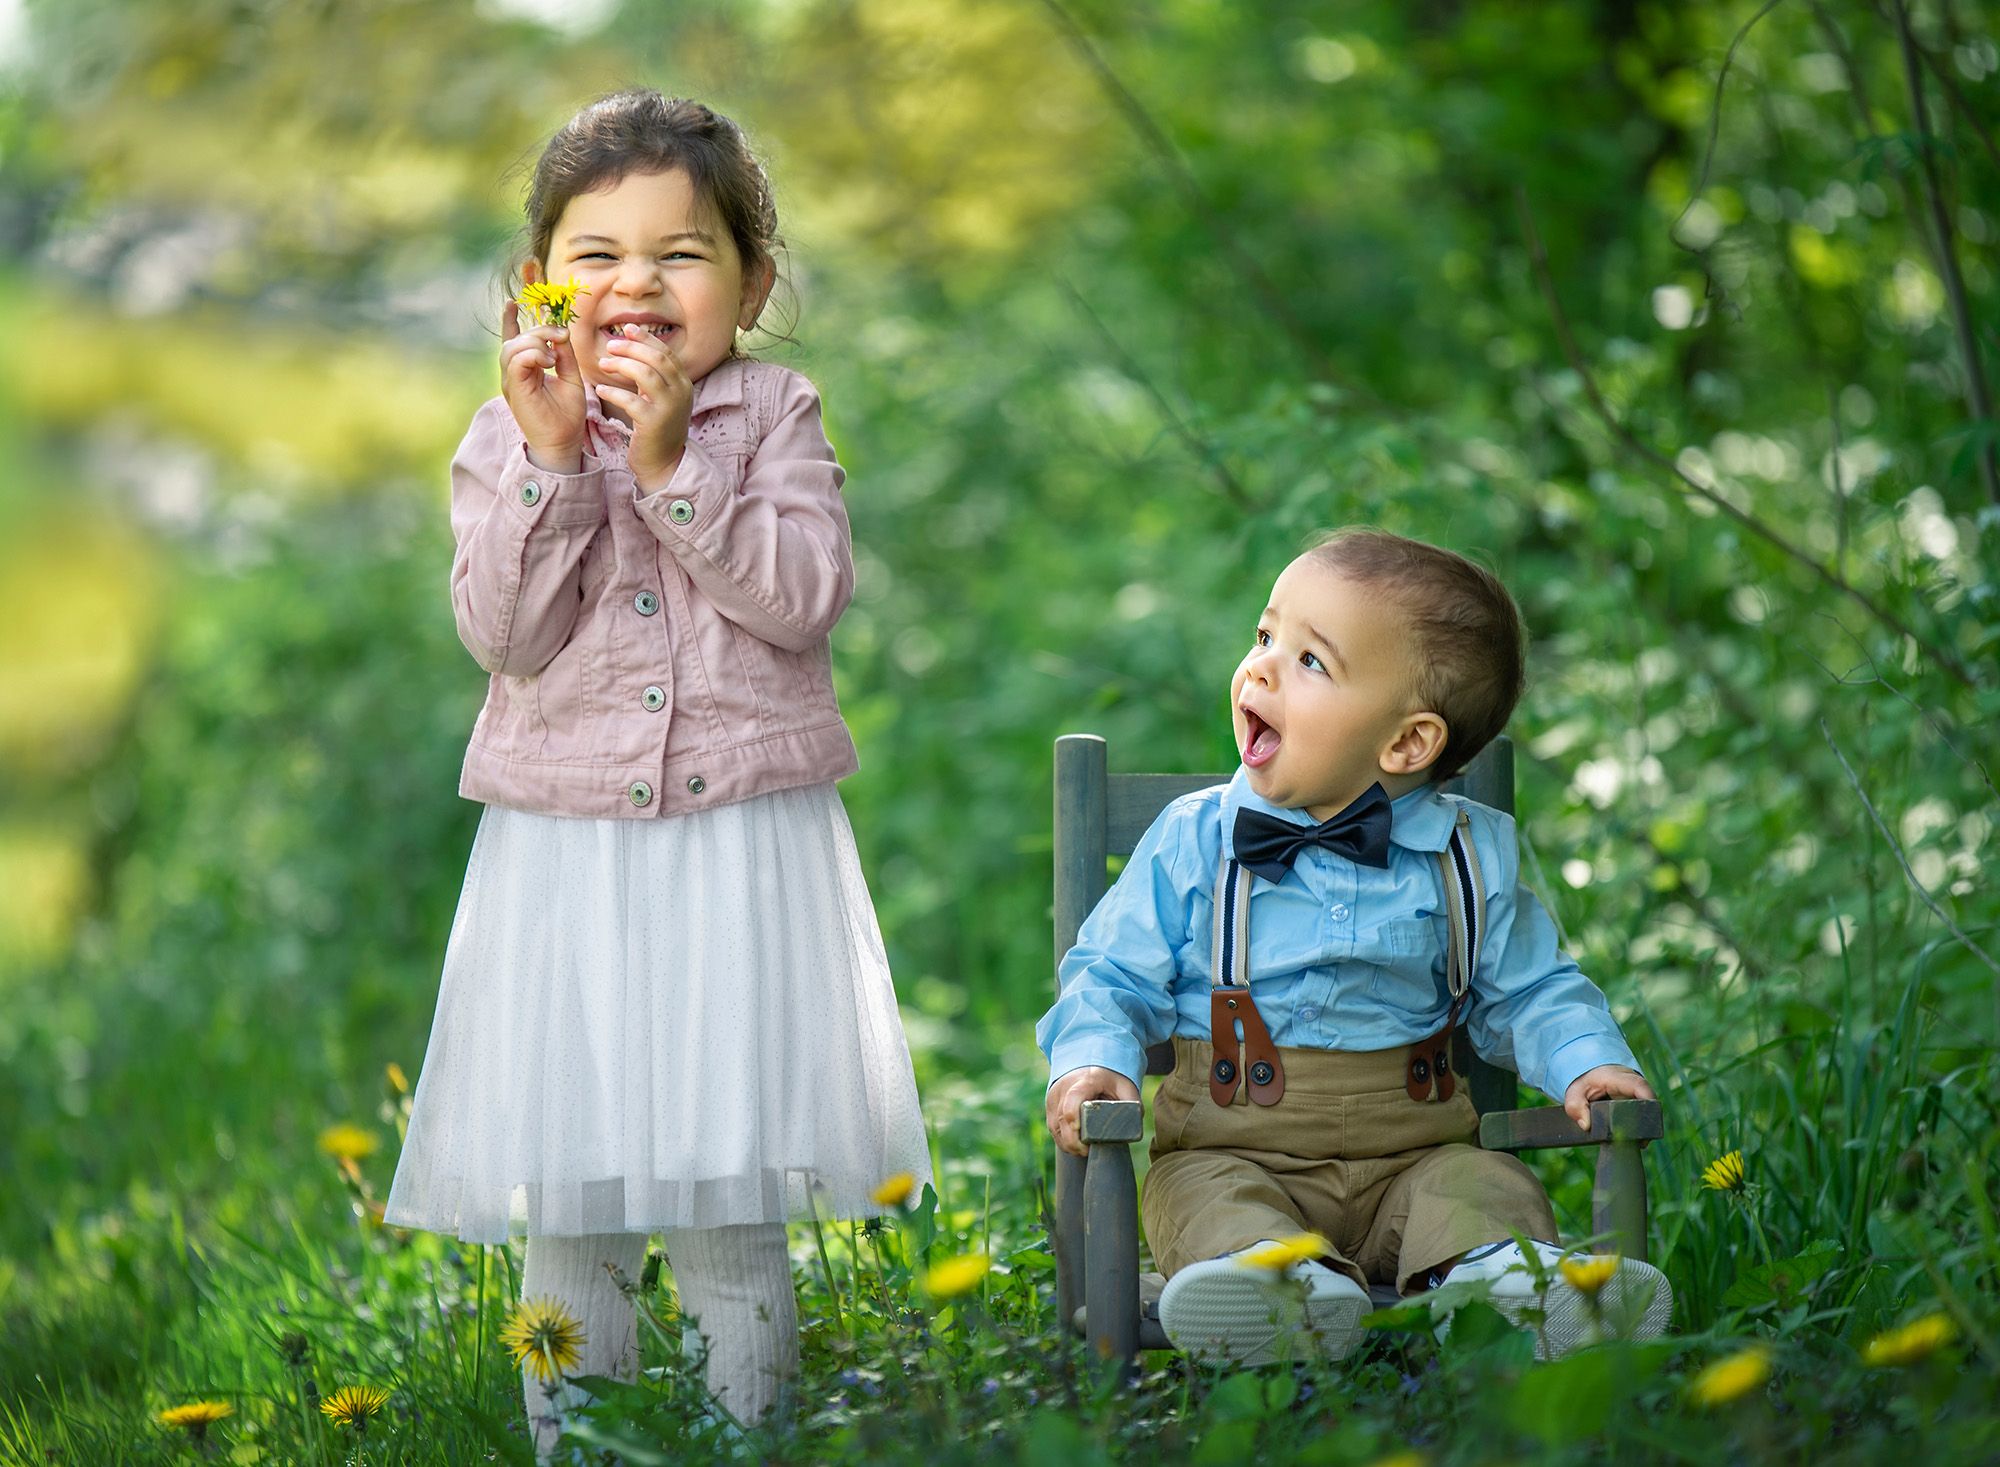 CT Family Photographer young girl smiling while holding a dandelion as younger brother smiles in awe while sitting in a rustic chair beside her